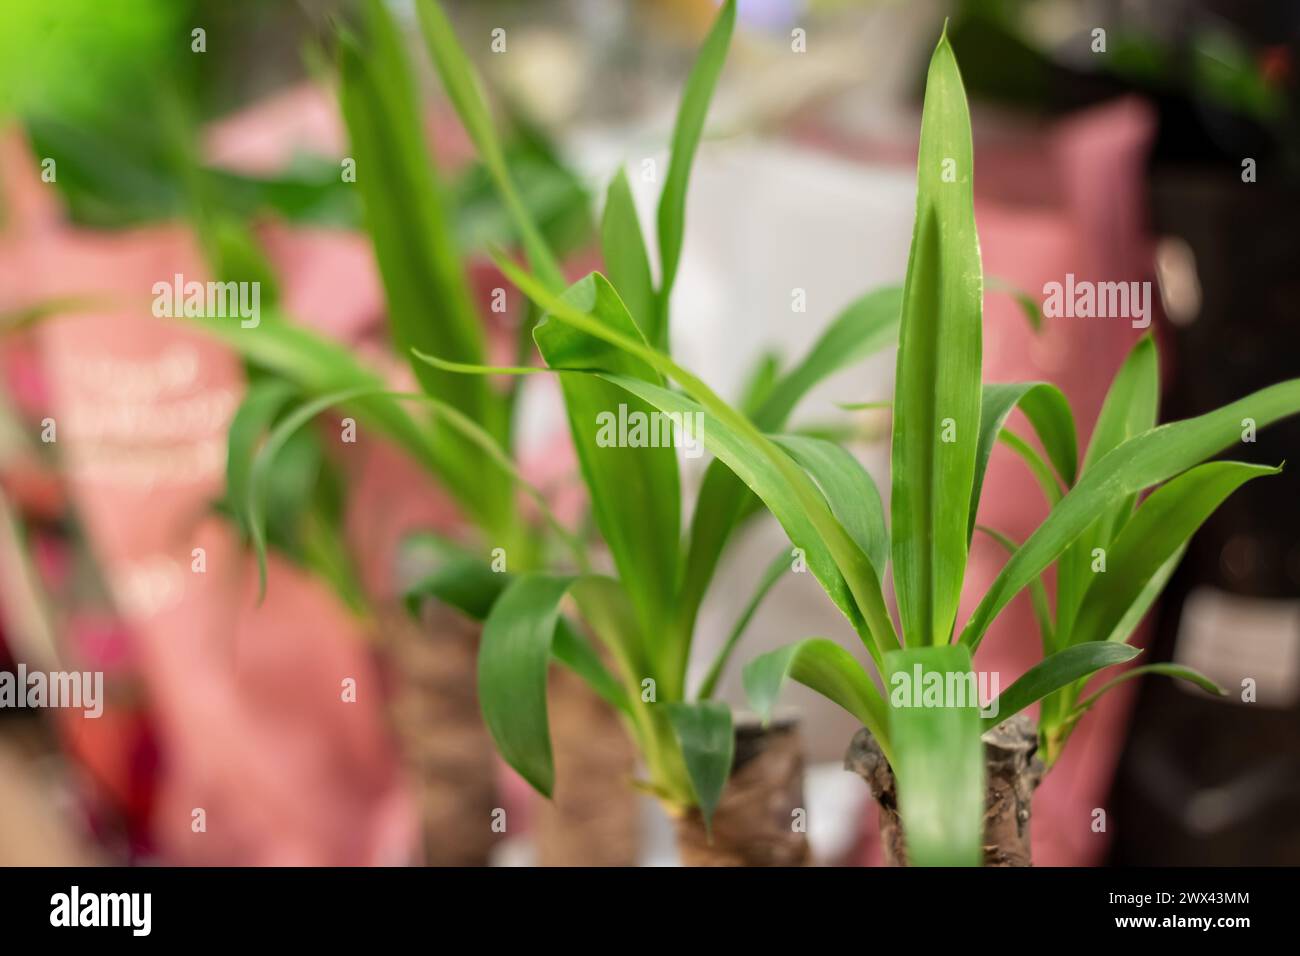 Green leaves of lush houseplant close up, background Stock Photo